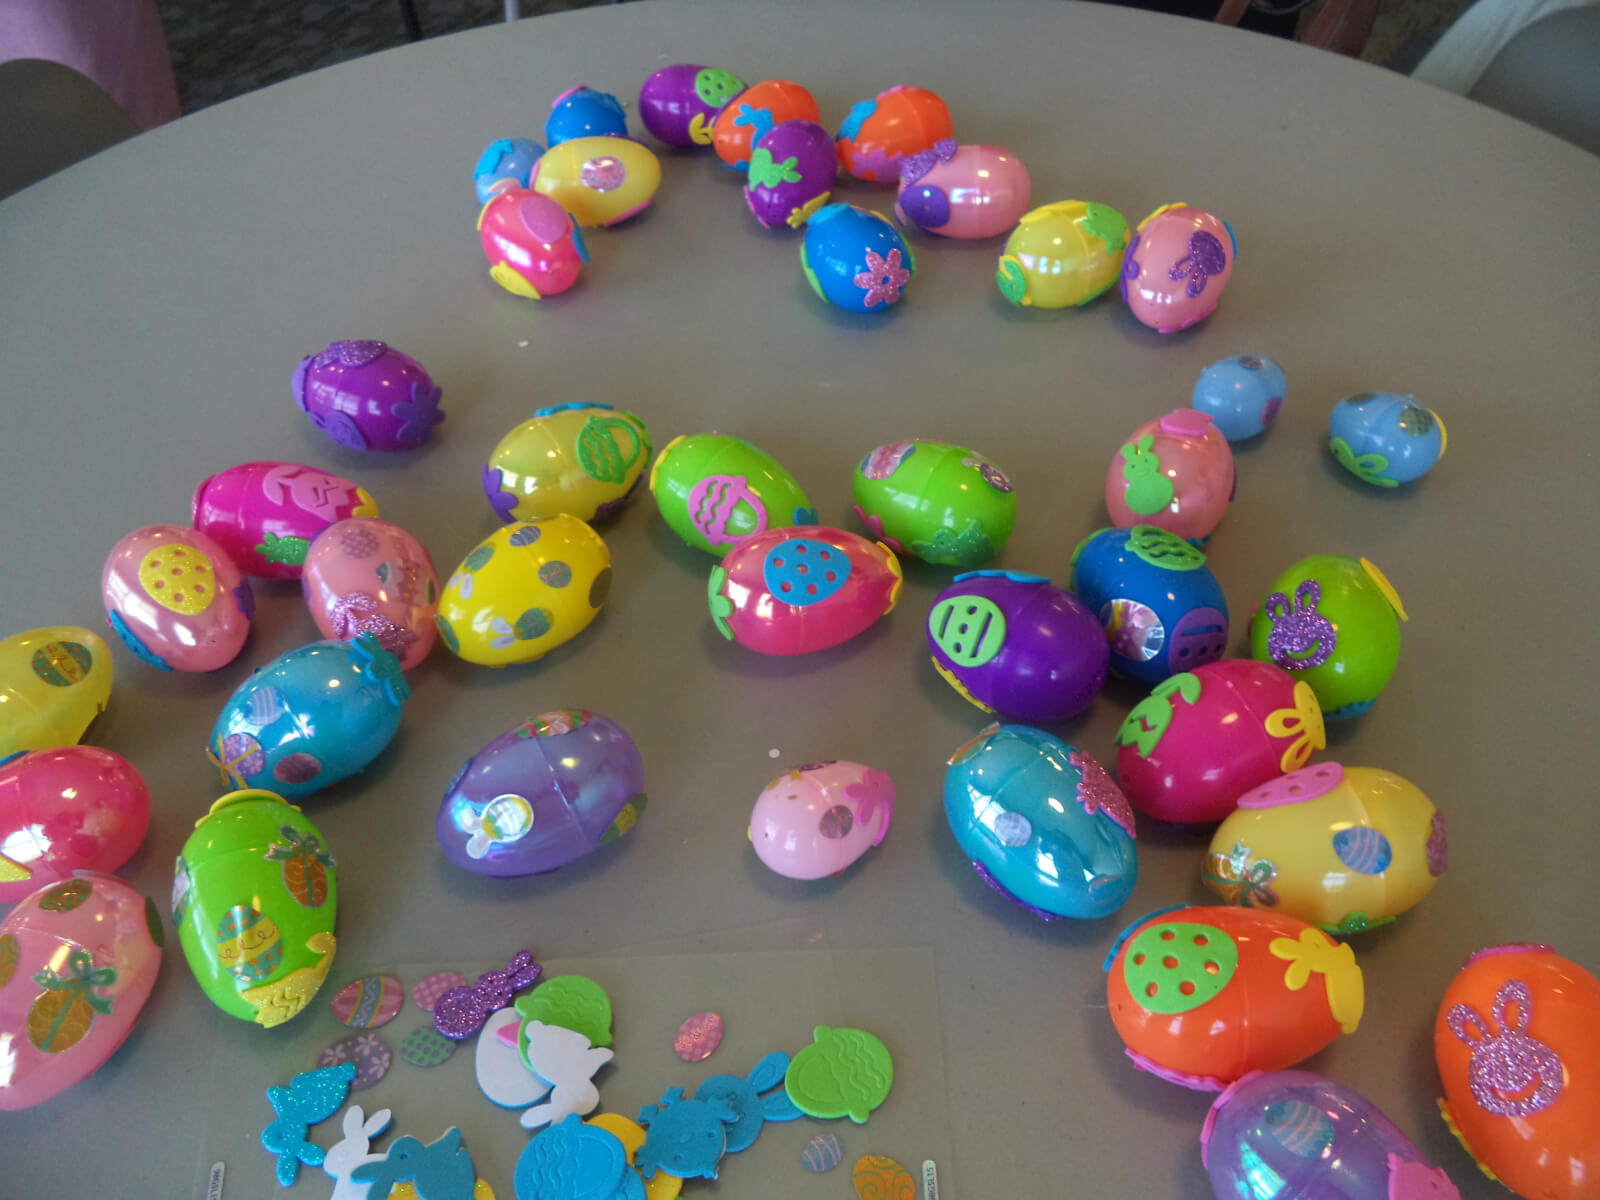 Decorated plastic Easter eggs of various bright colors and stickers 